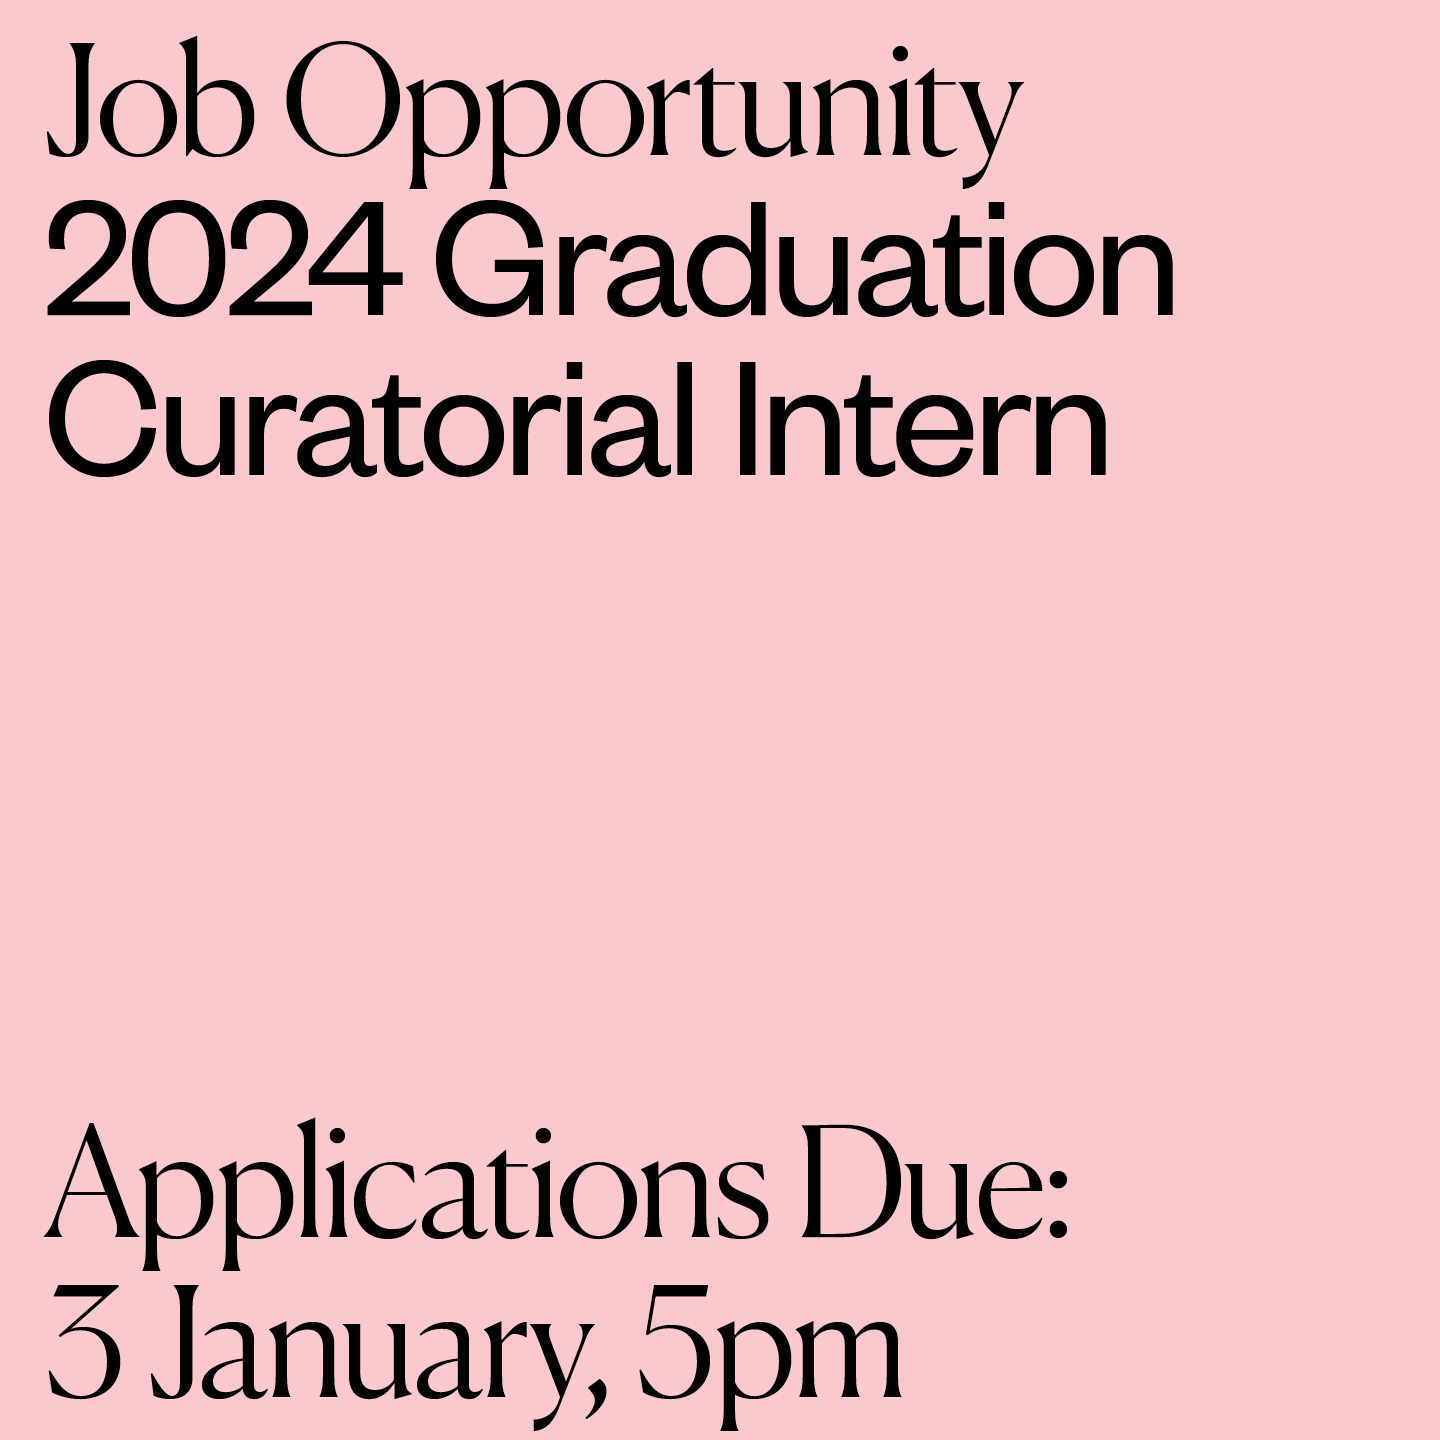 Black text on pink background that reads: "Job Opportunity; 2024 Graduation Curatorial Intern; Applications Due: 3 January, 5pm"